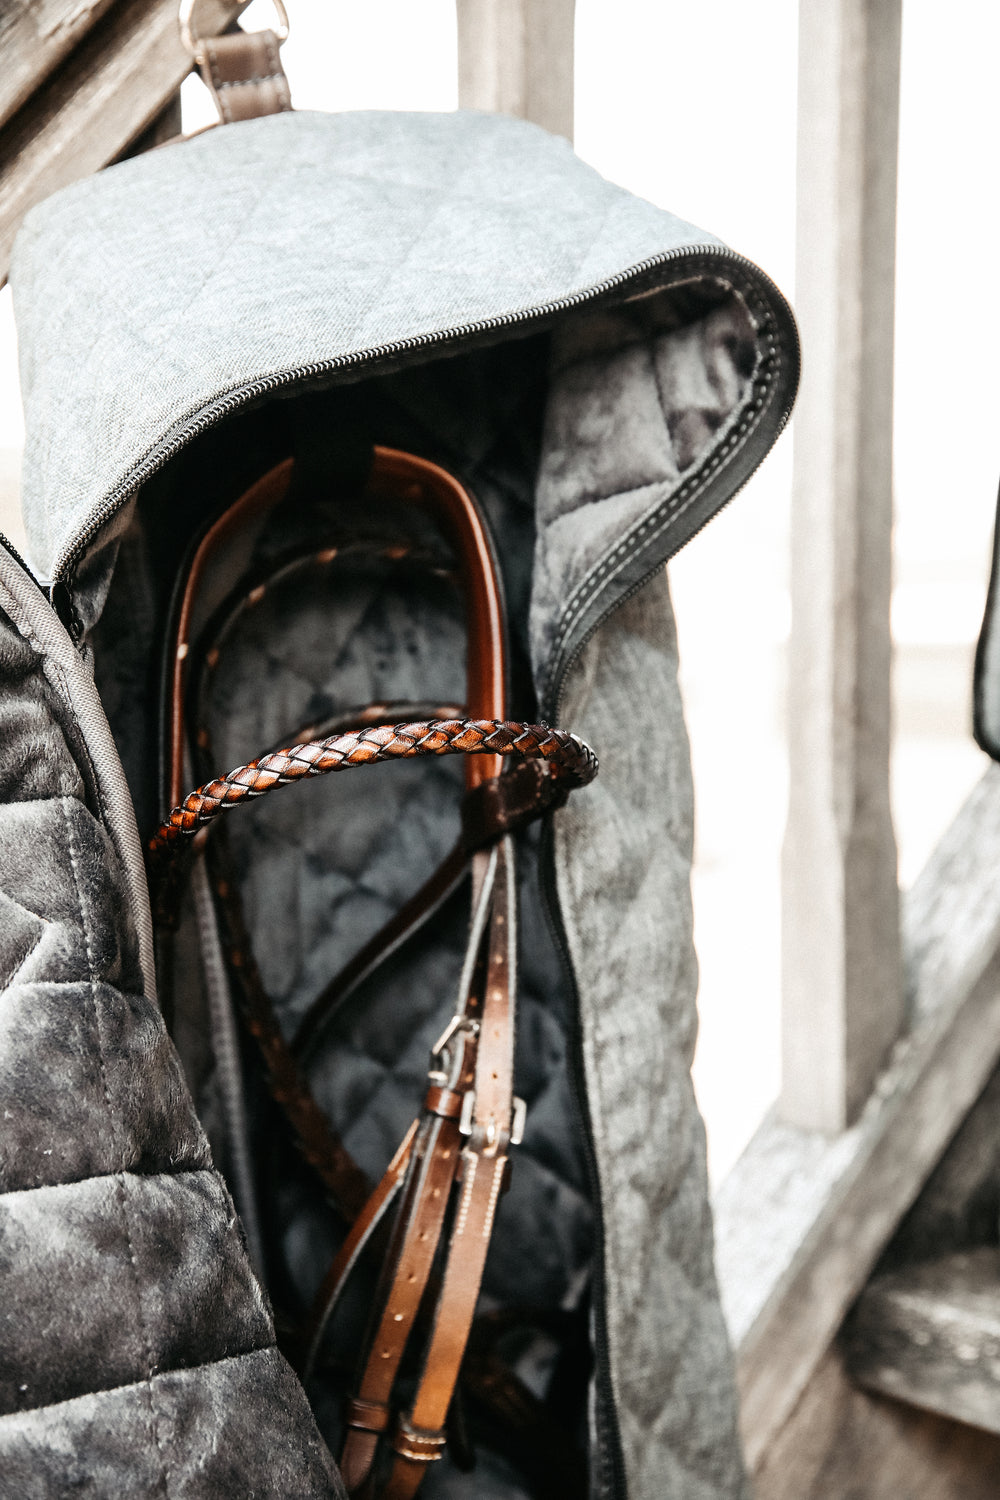 Equestrian-inspired and versatile, The Bridle Bag from the runway